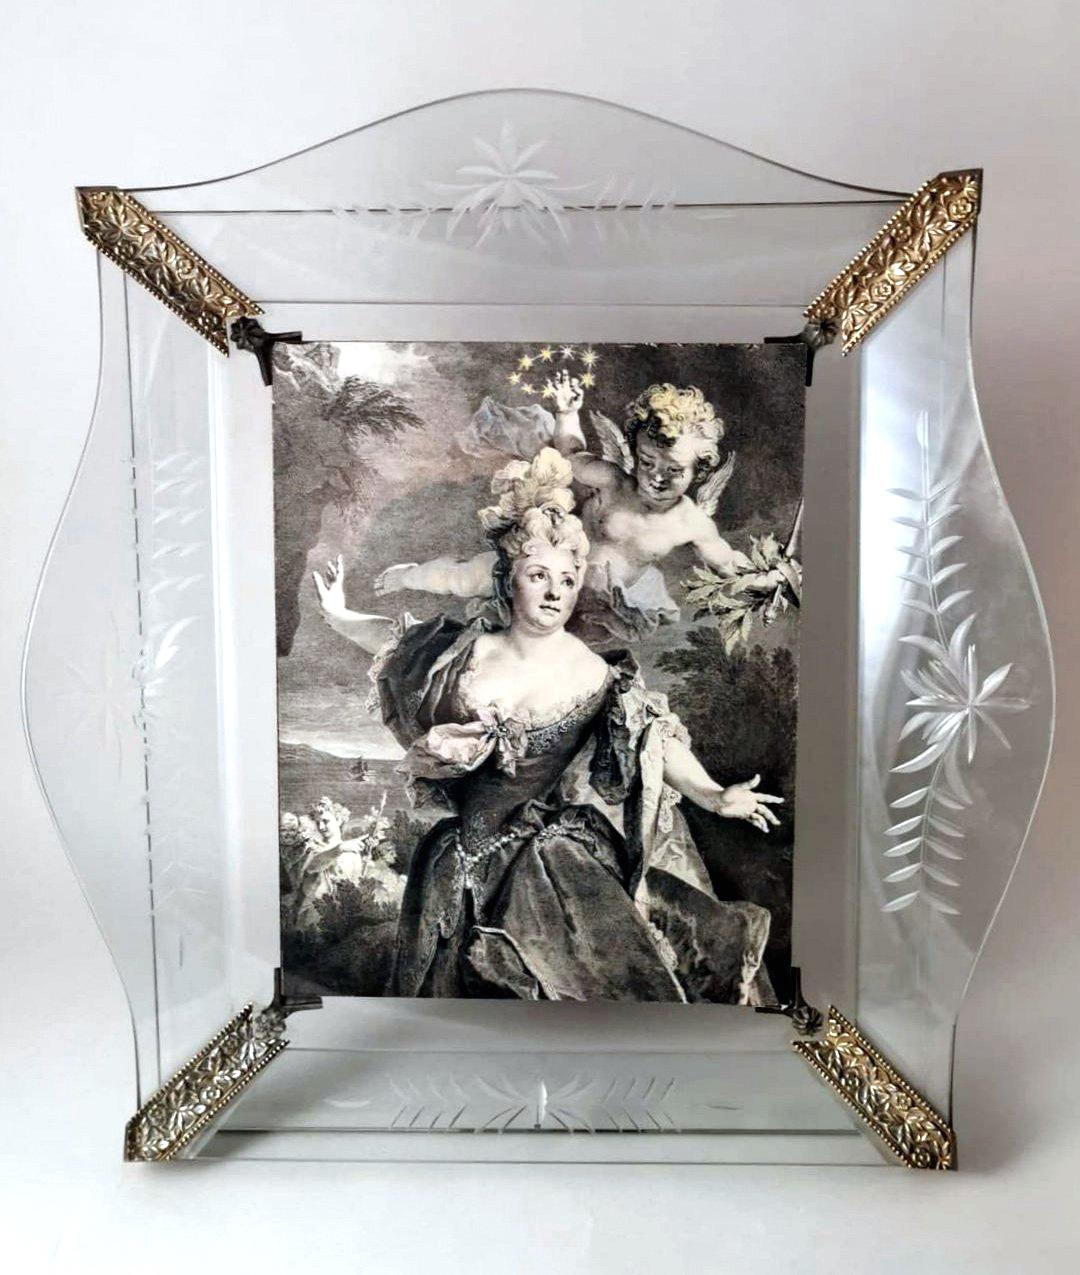 Hand-Crafted Vintage Italian Picture Frame With Engraved And Ground Crystal Plates